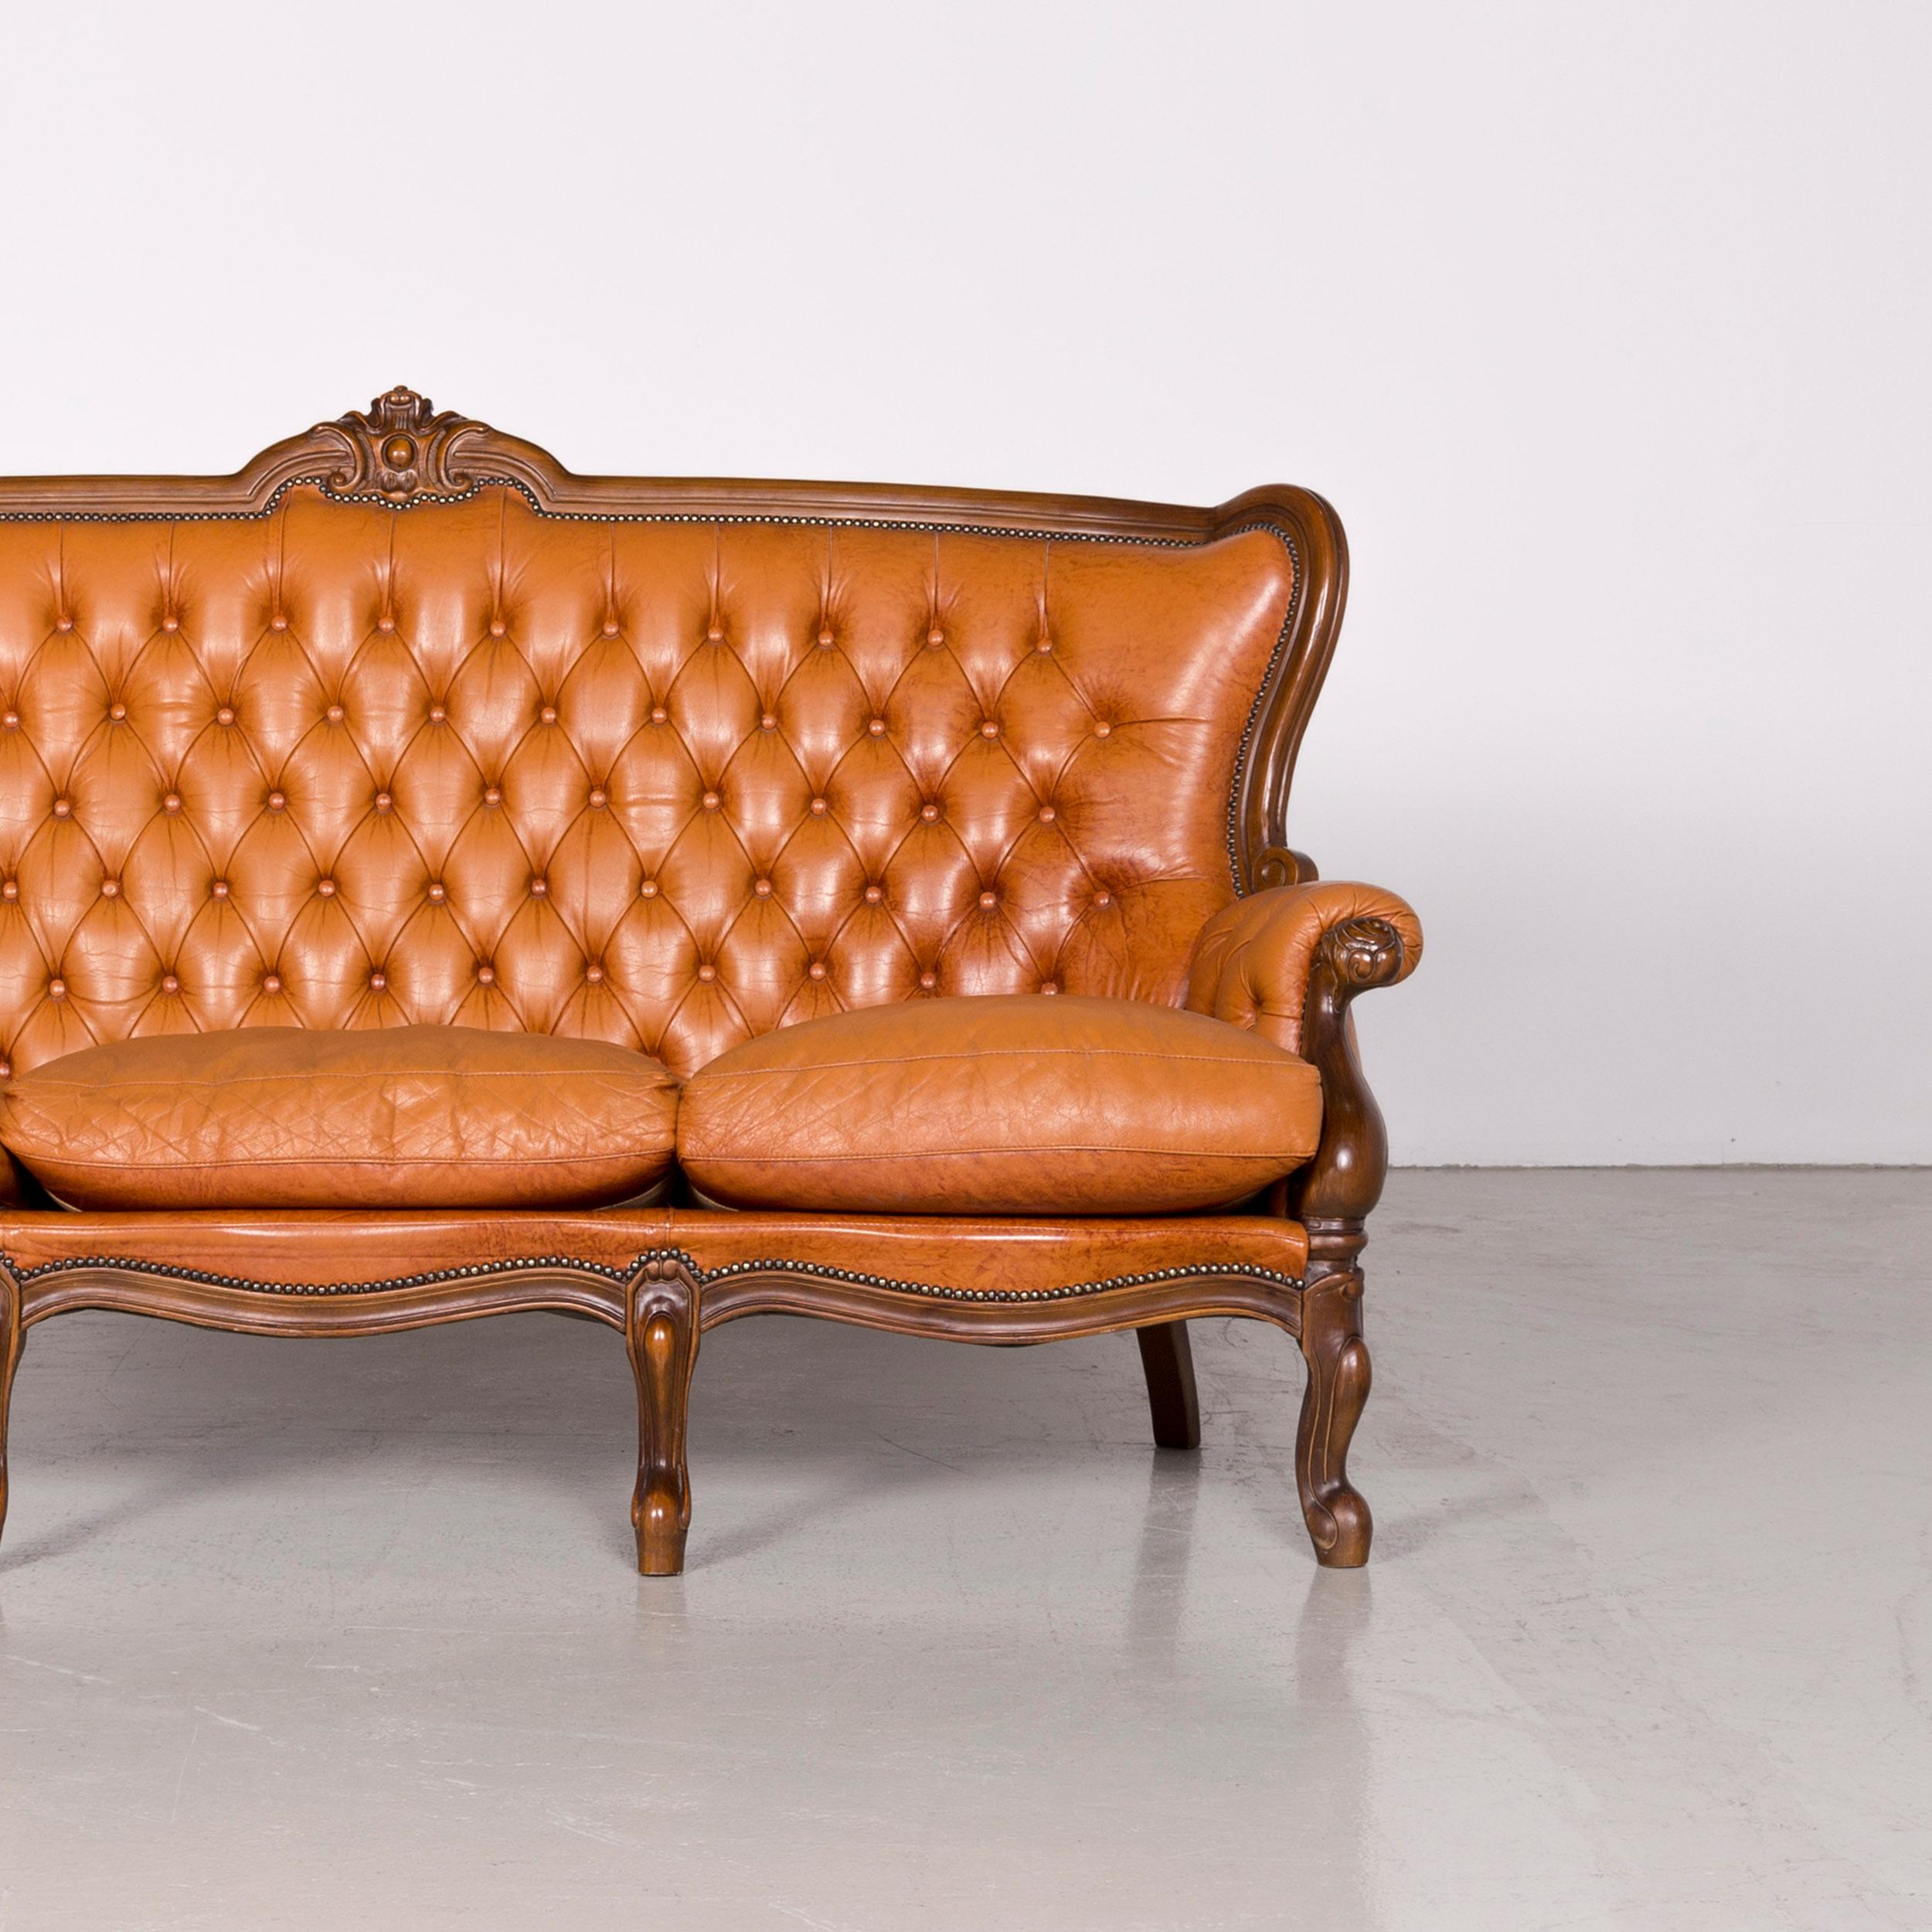 Chesterfield Leather Sofa Brown Vintage Retro Couch In Good Condition For Sale In Cologne, DE